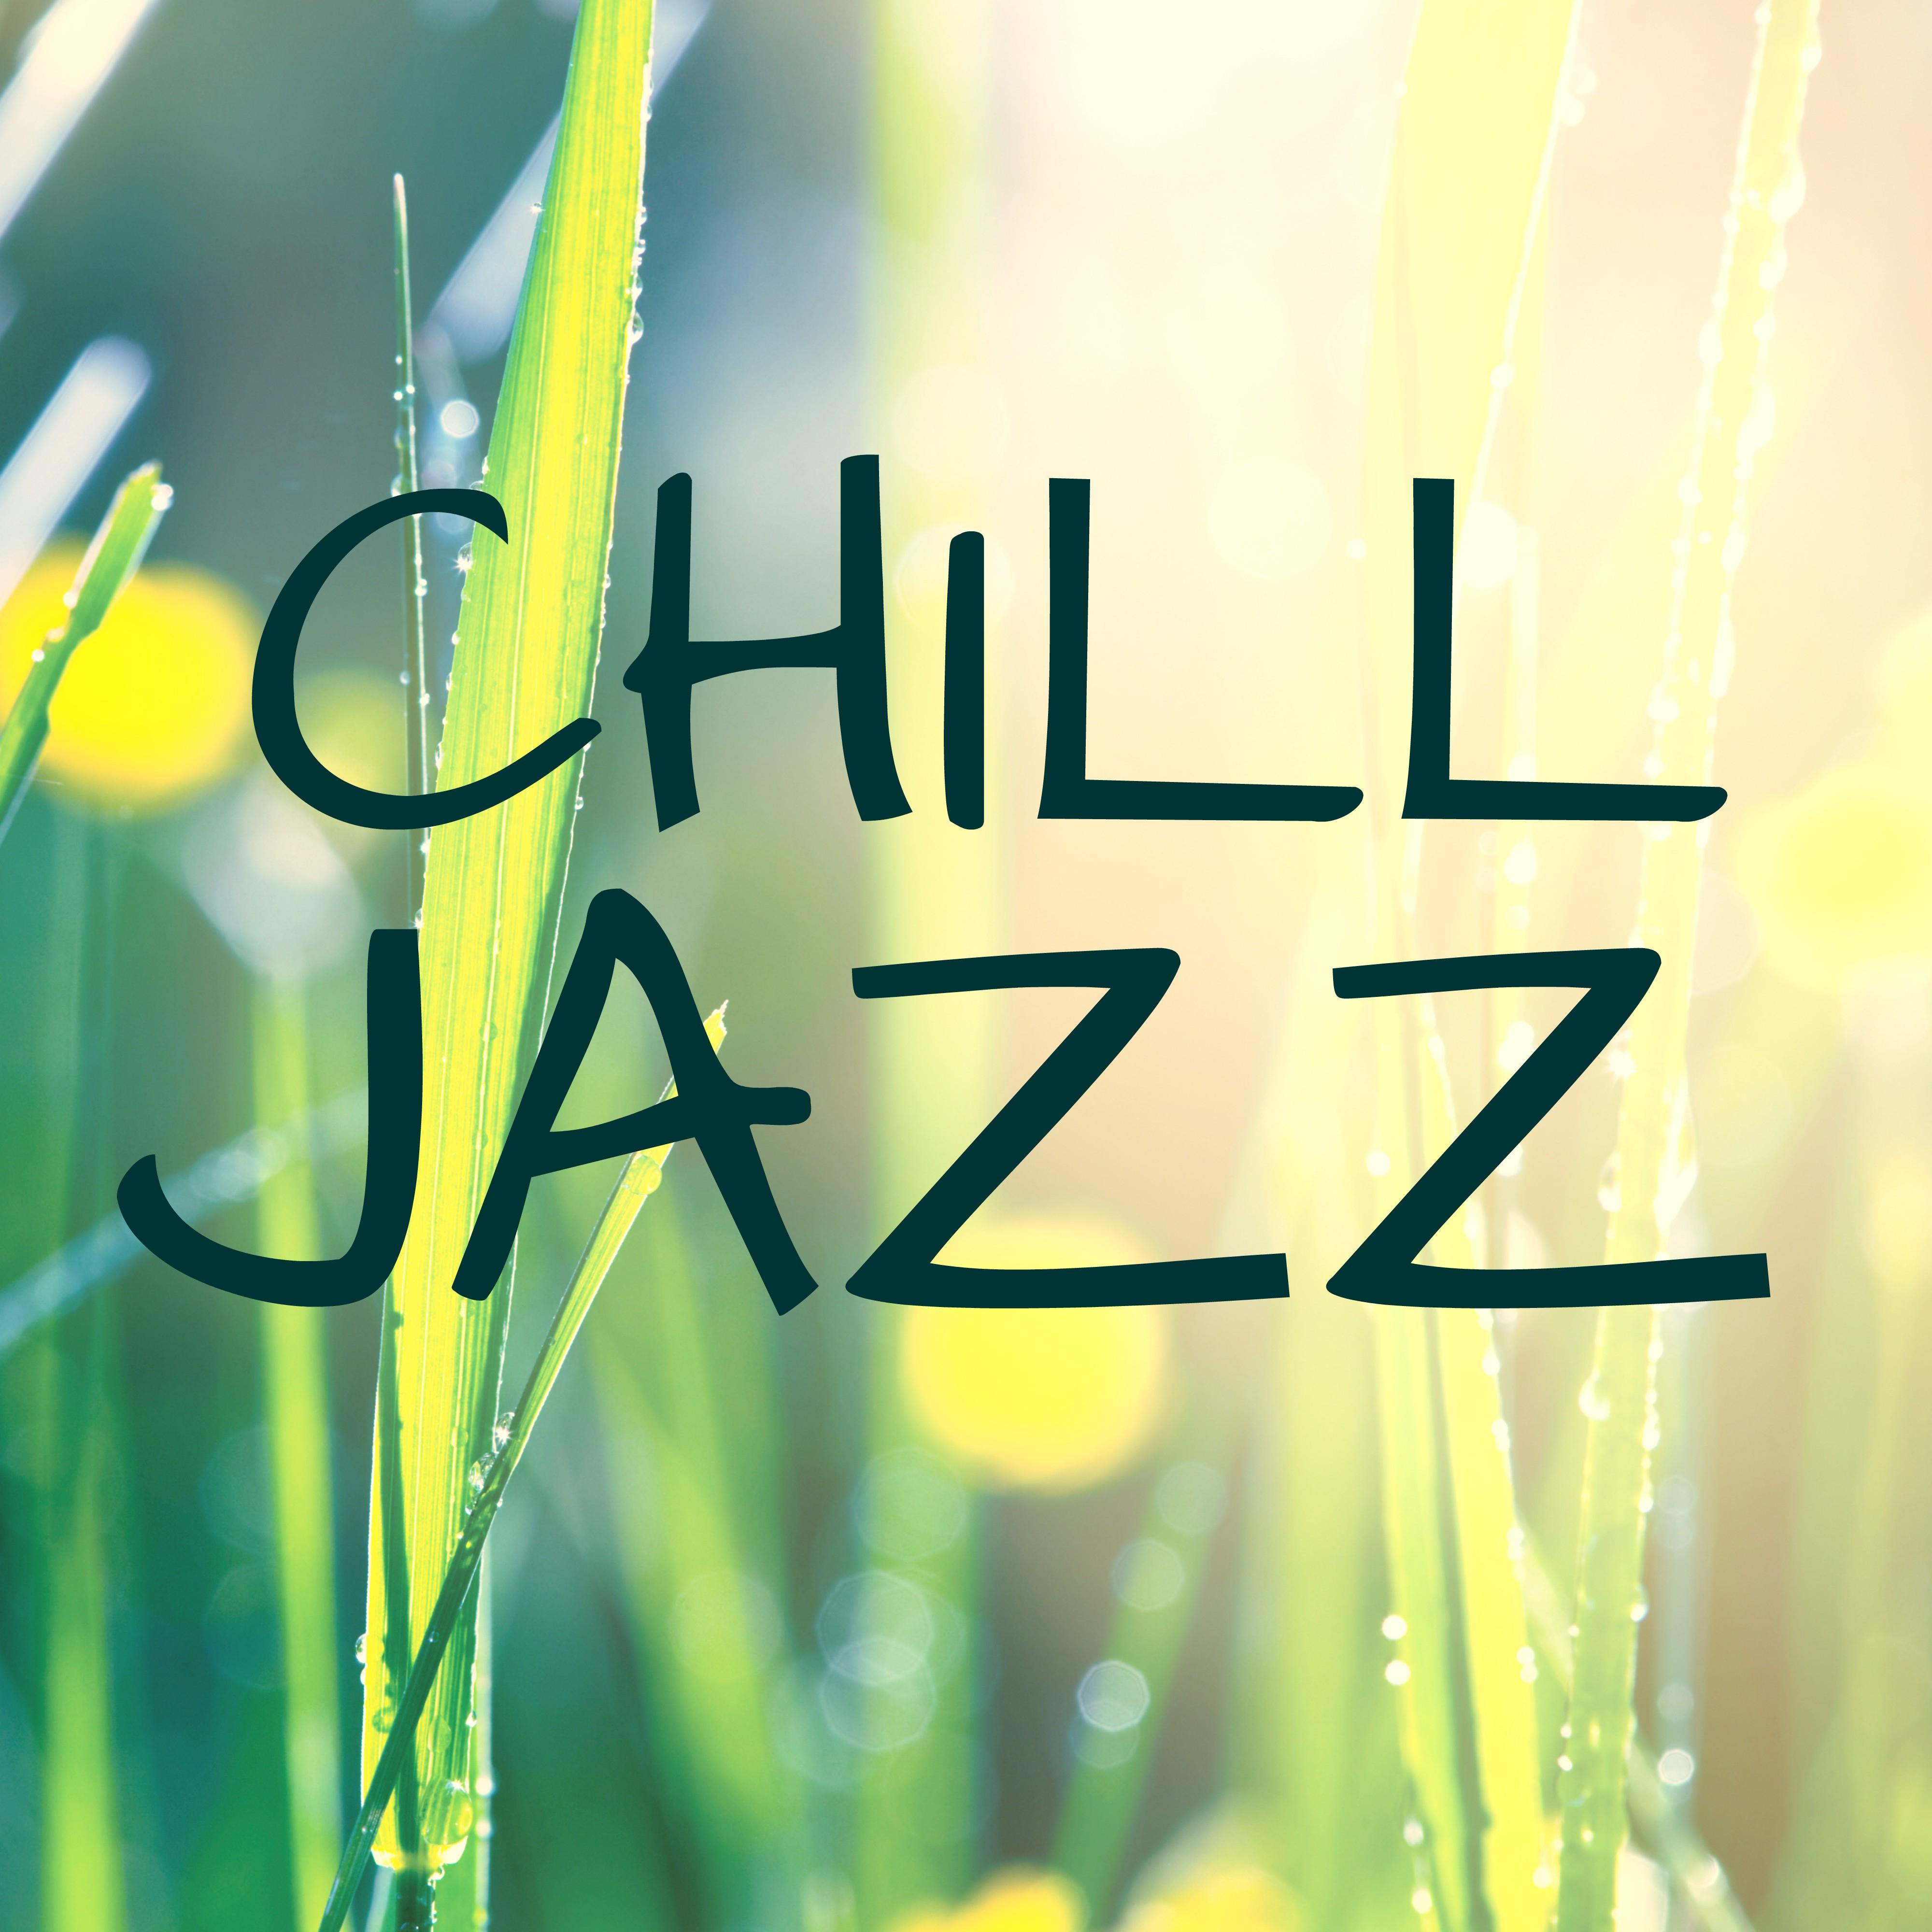 Chill Jazz - Classic Instrumental Chill Out Music for Relaxing Time